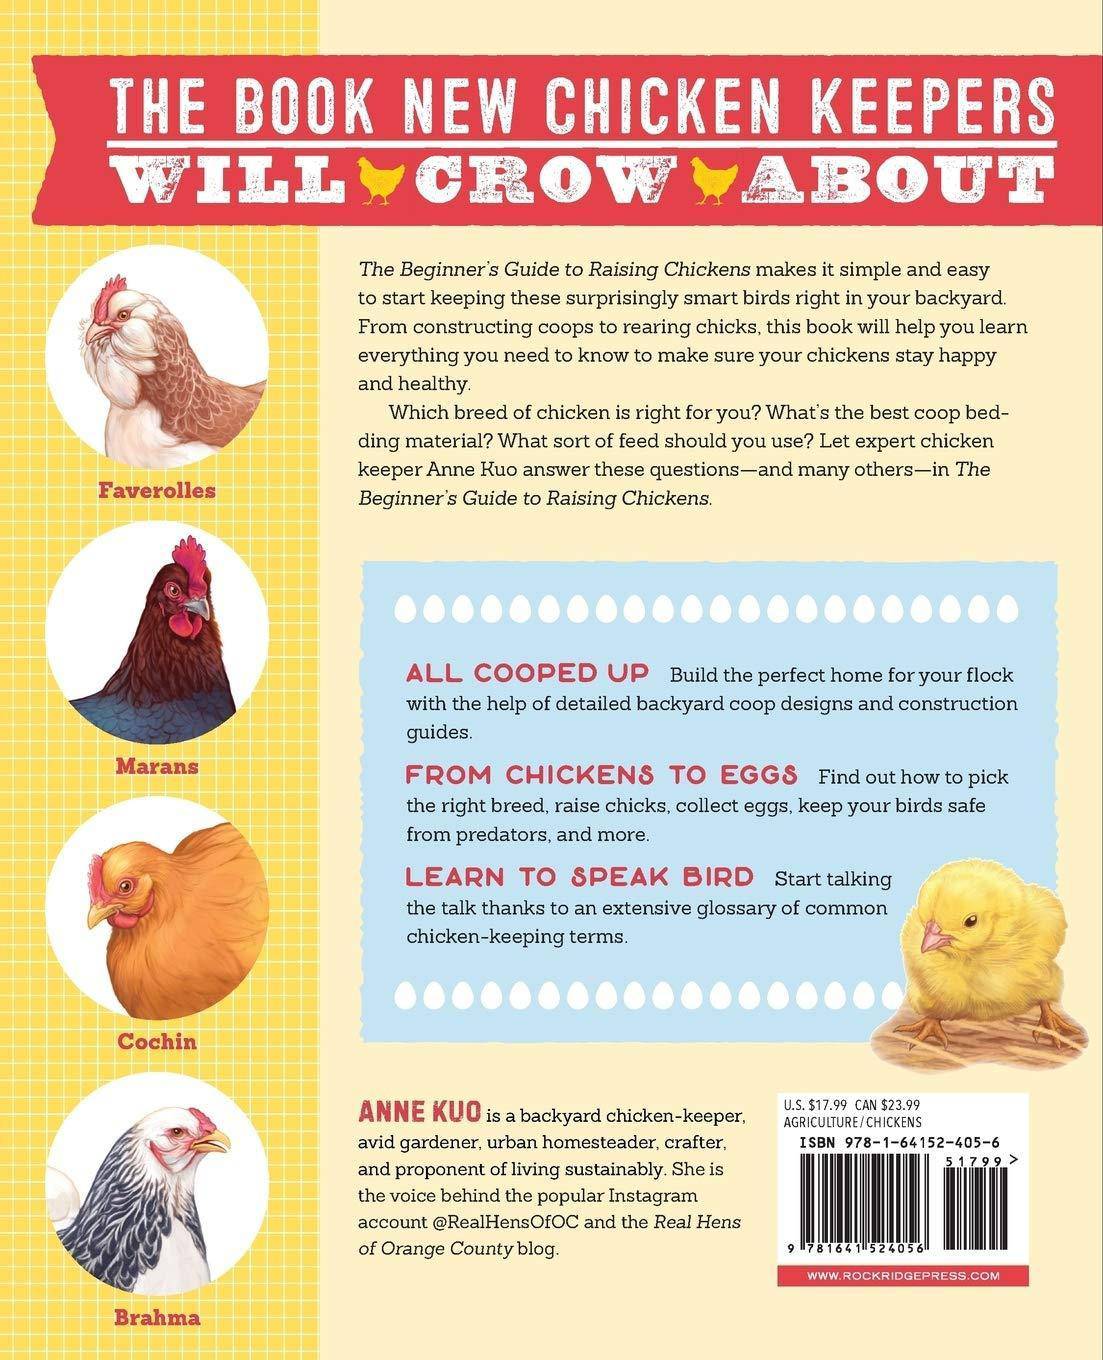 Beginner's Guide to Raising Chickens: How to Raise a Happy Backy - CA Corrections Bookstore